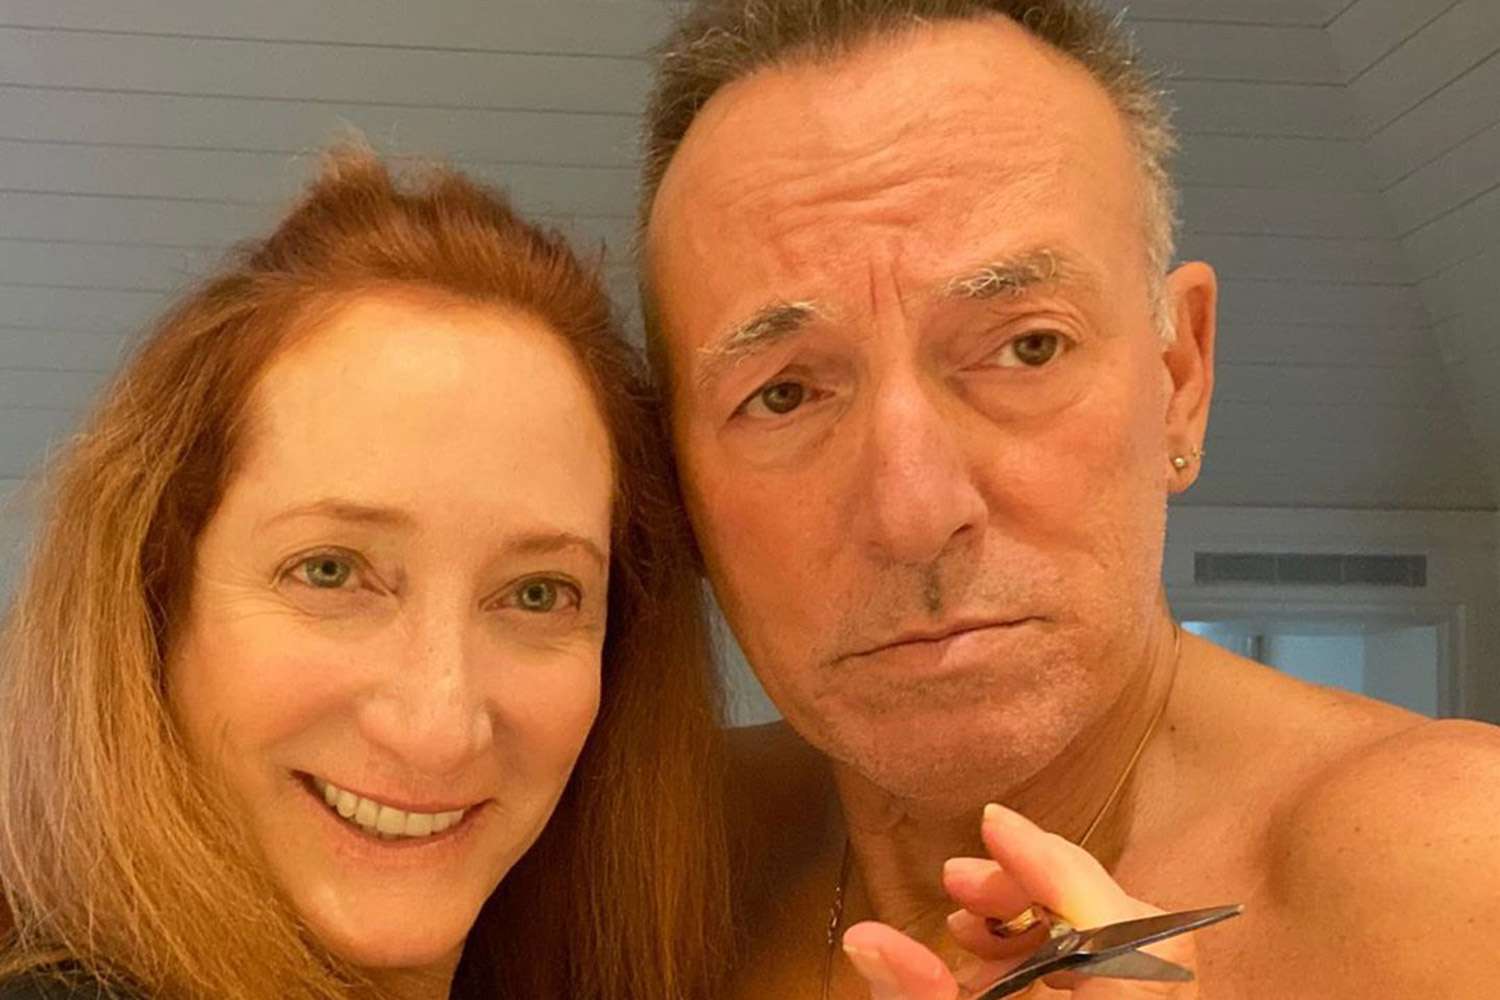 Bruce Springsteen Gets a Fresh Cut From His Wife, Patti Scialfa